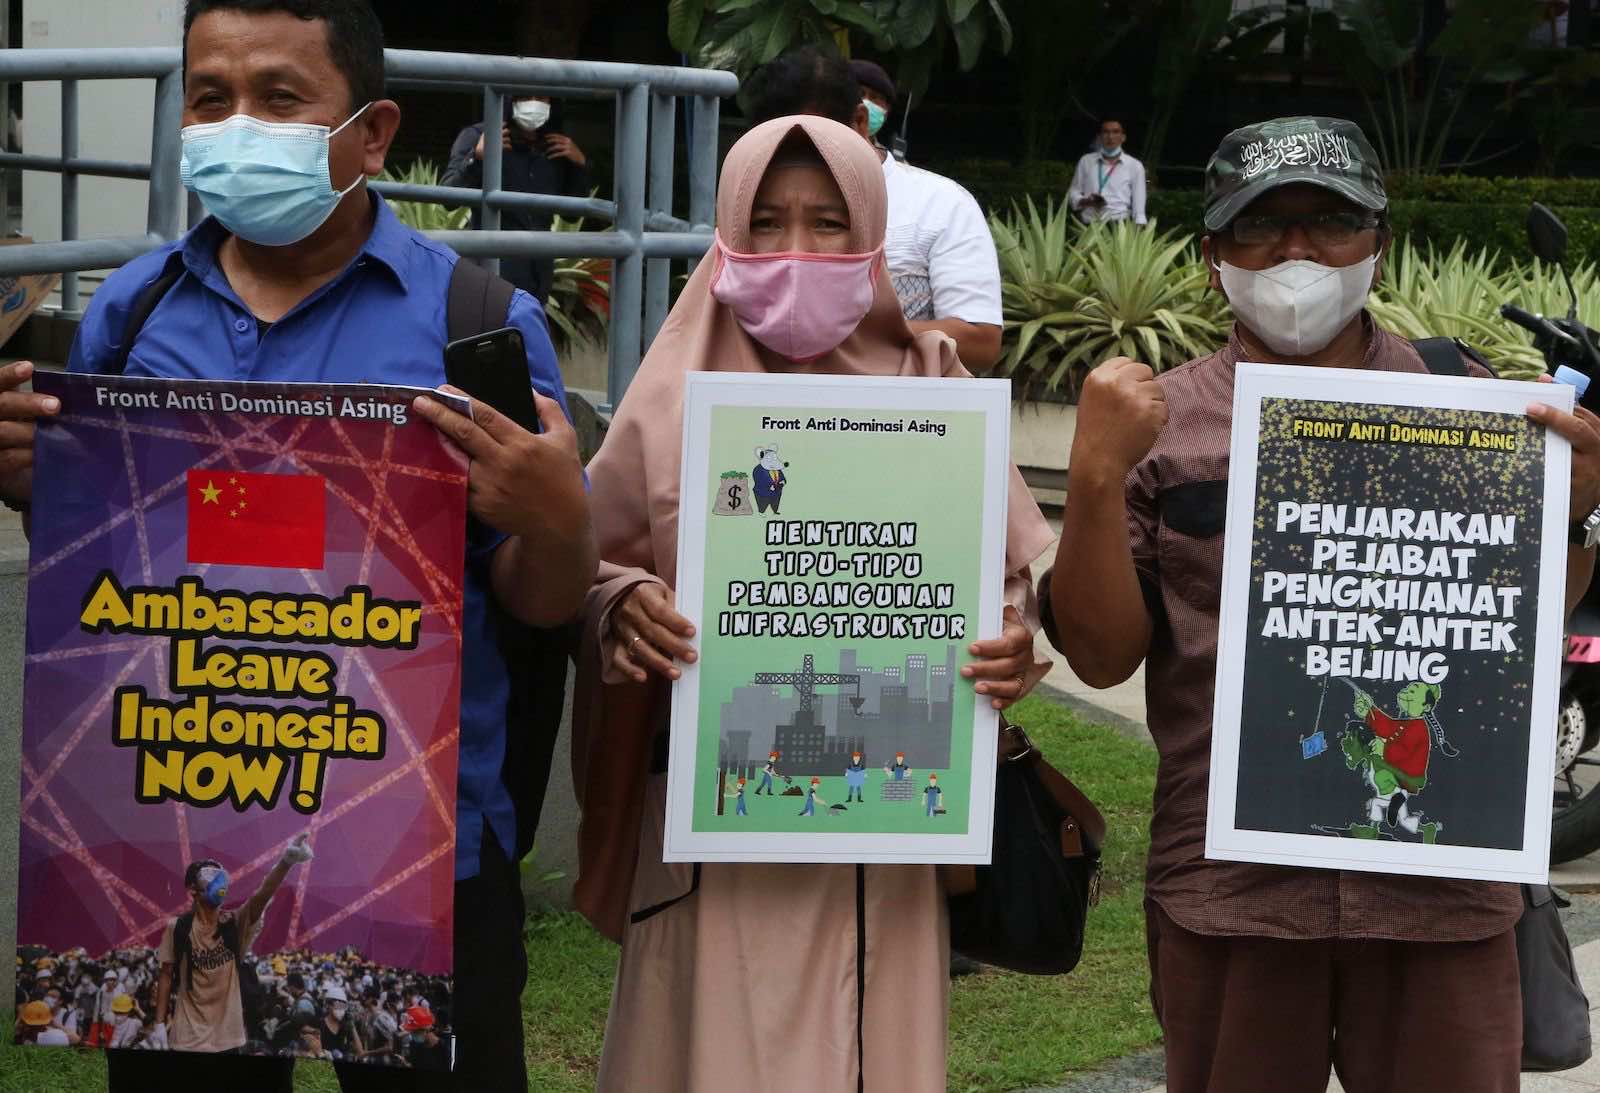 Protests about China’s claims in the disputed South China Sea outside the Chinese Embassy in Jakarta in December (Dasril Roszandi/AFP via Getty Images)